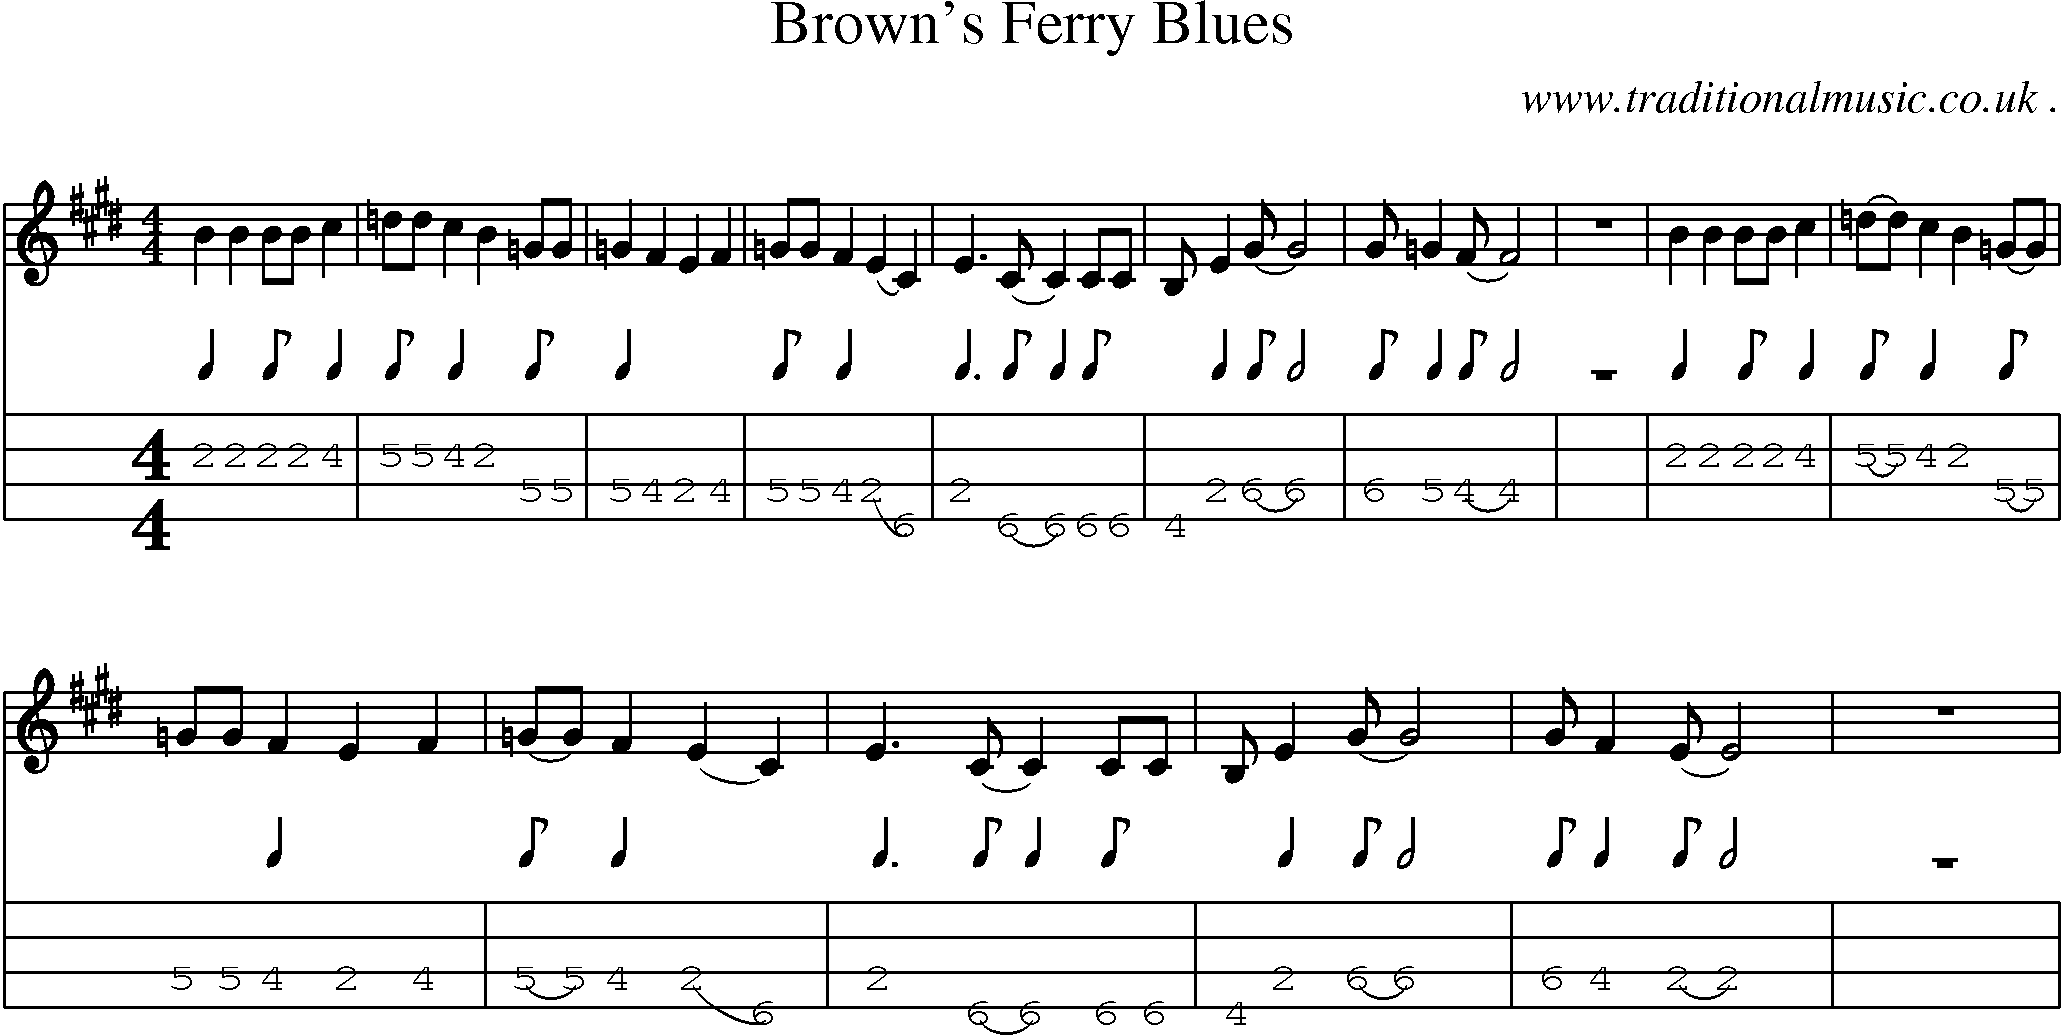 Music Score and Mandolin Tabs for Browns Ferry Blues